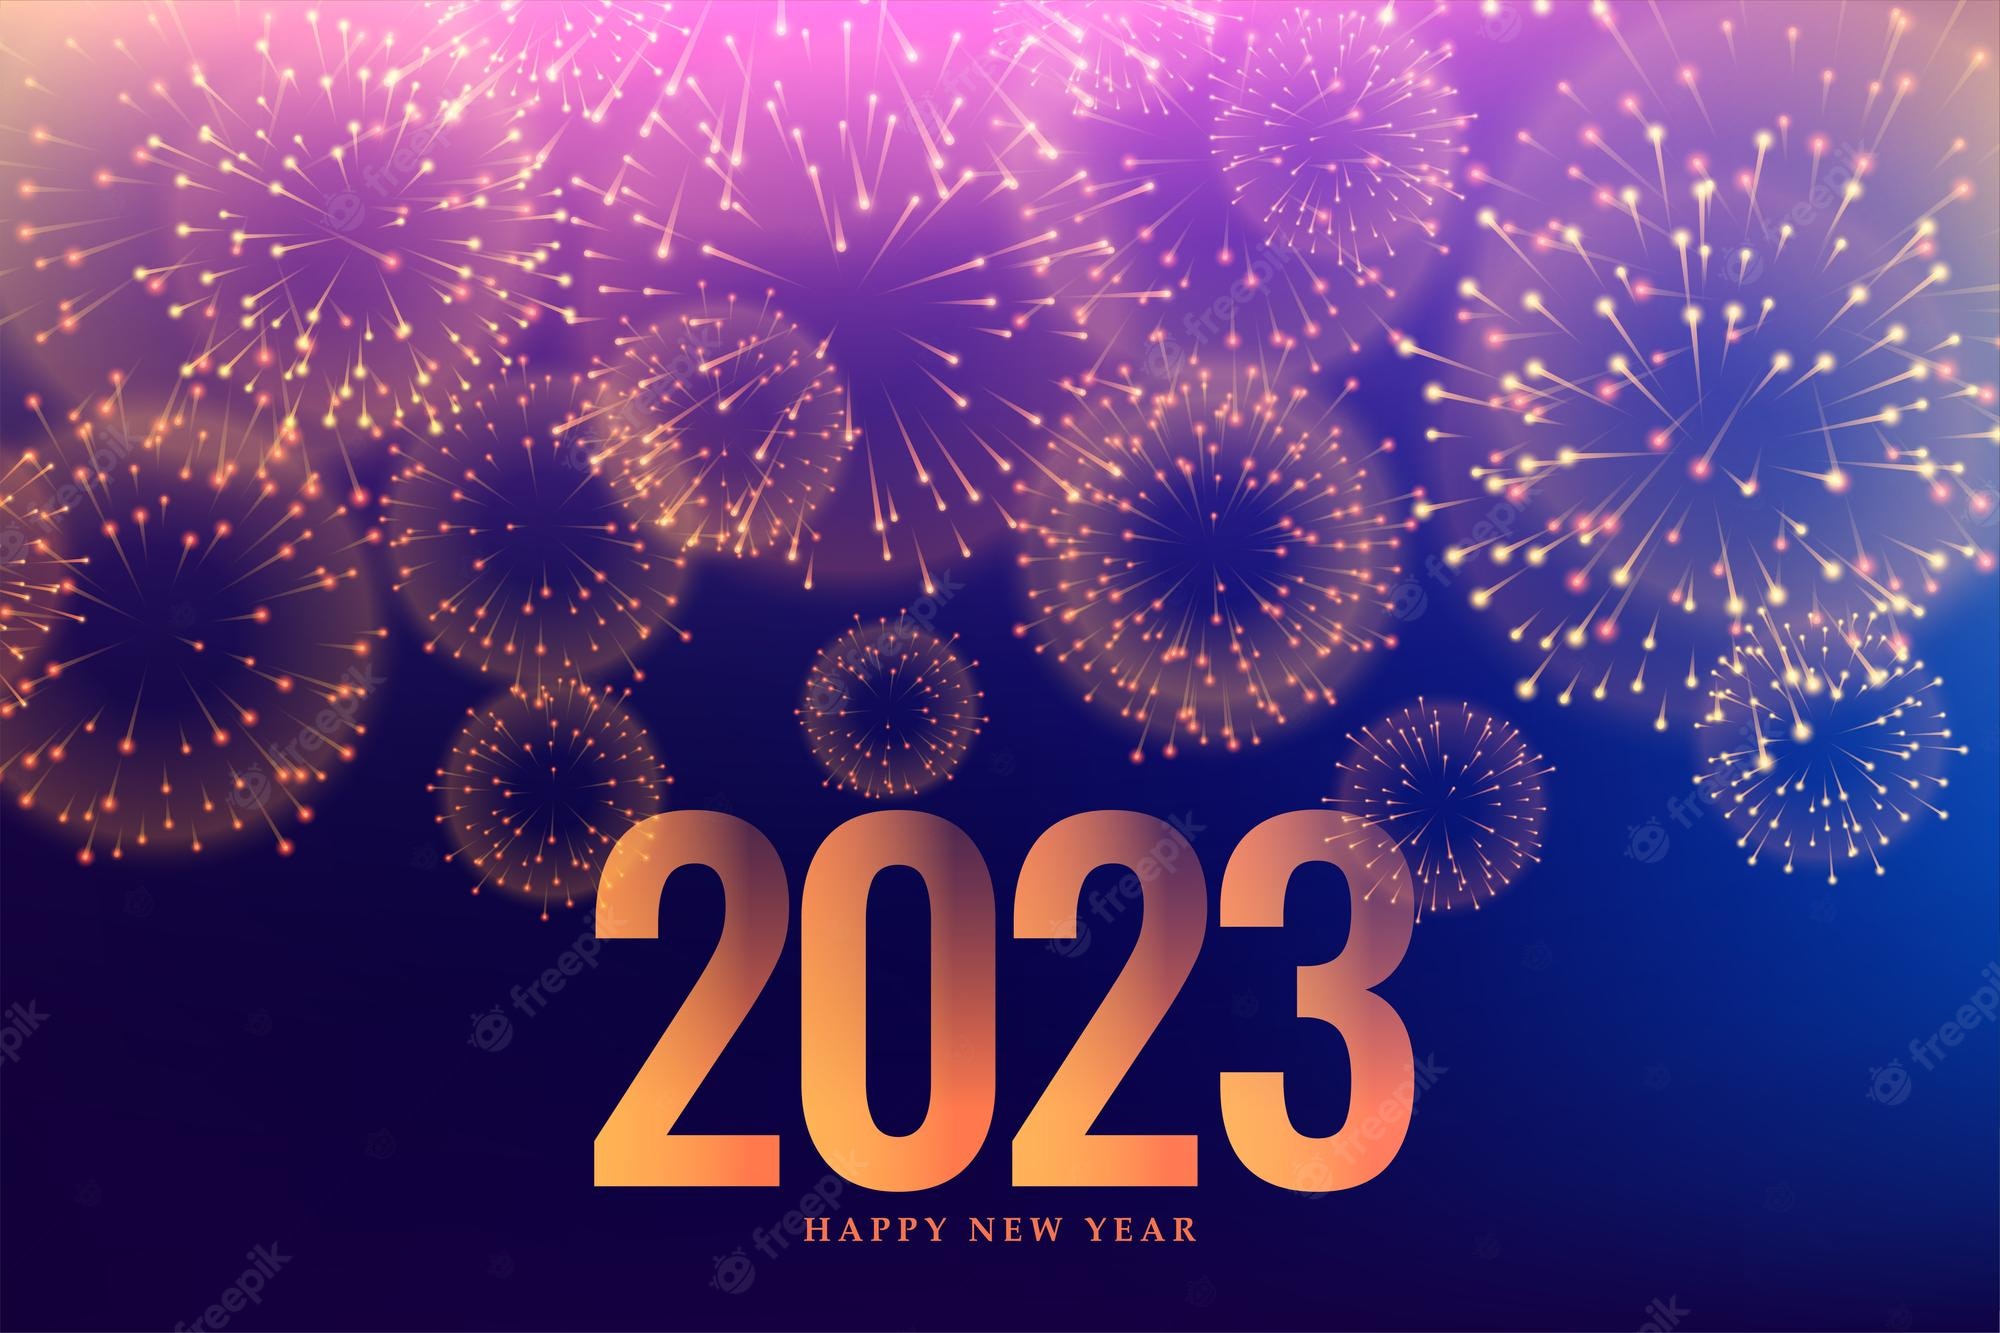 2023 Happy New Year Fireworks Wallpapers - Wallpaper Cave